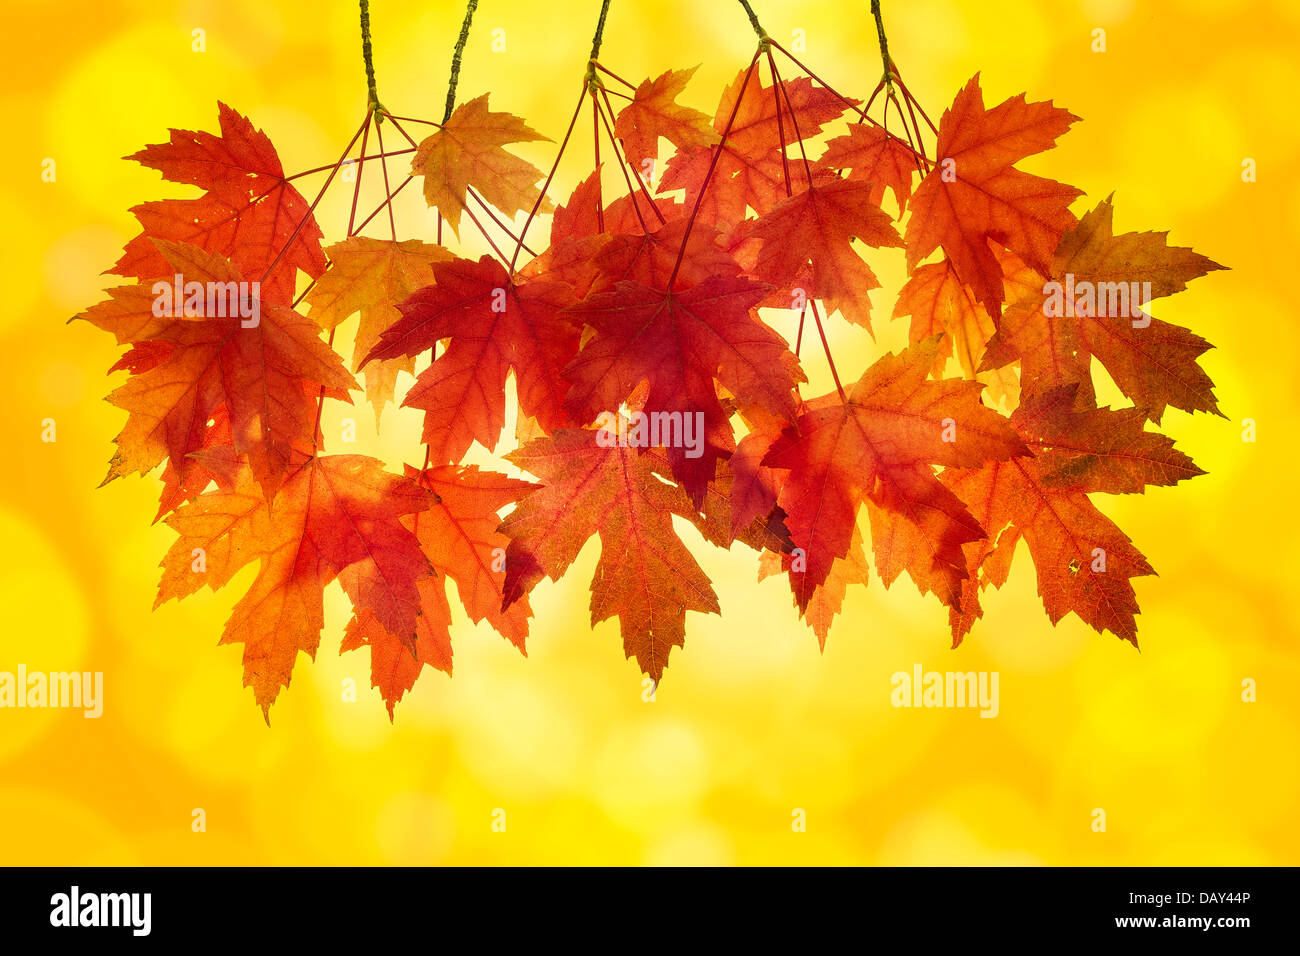 Red Maple Tree Leaves in Autumn with Orange Background and Blurred Bokeh Lights Stock Photo